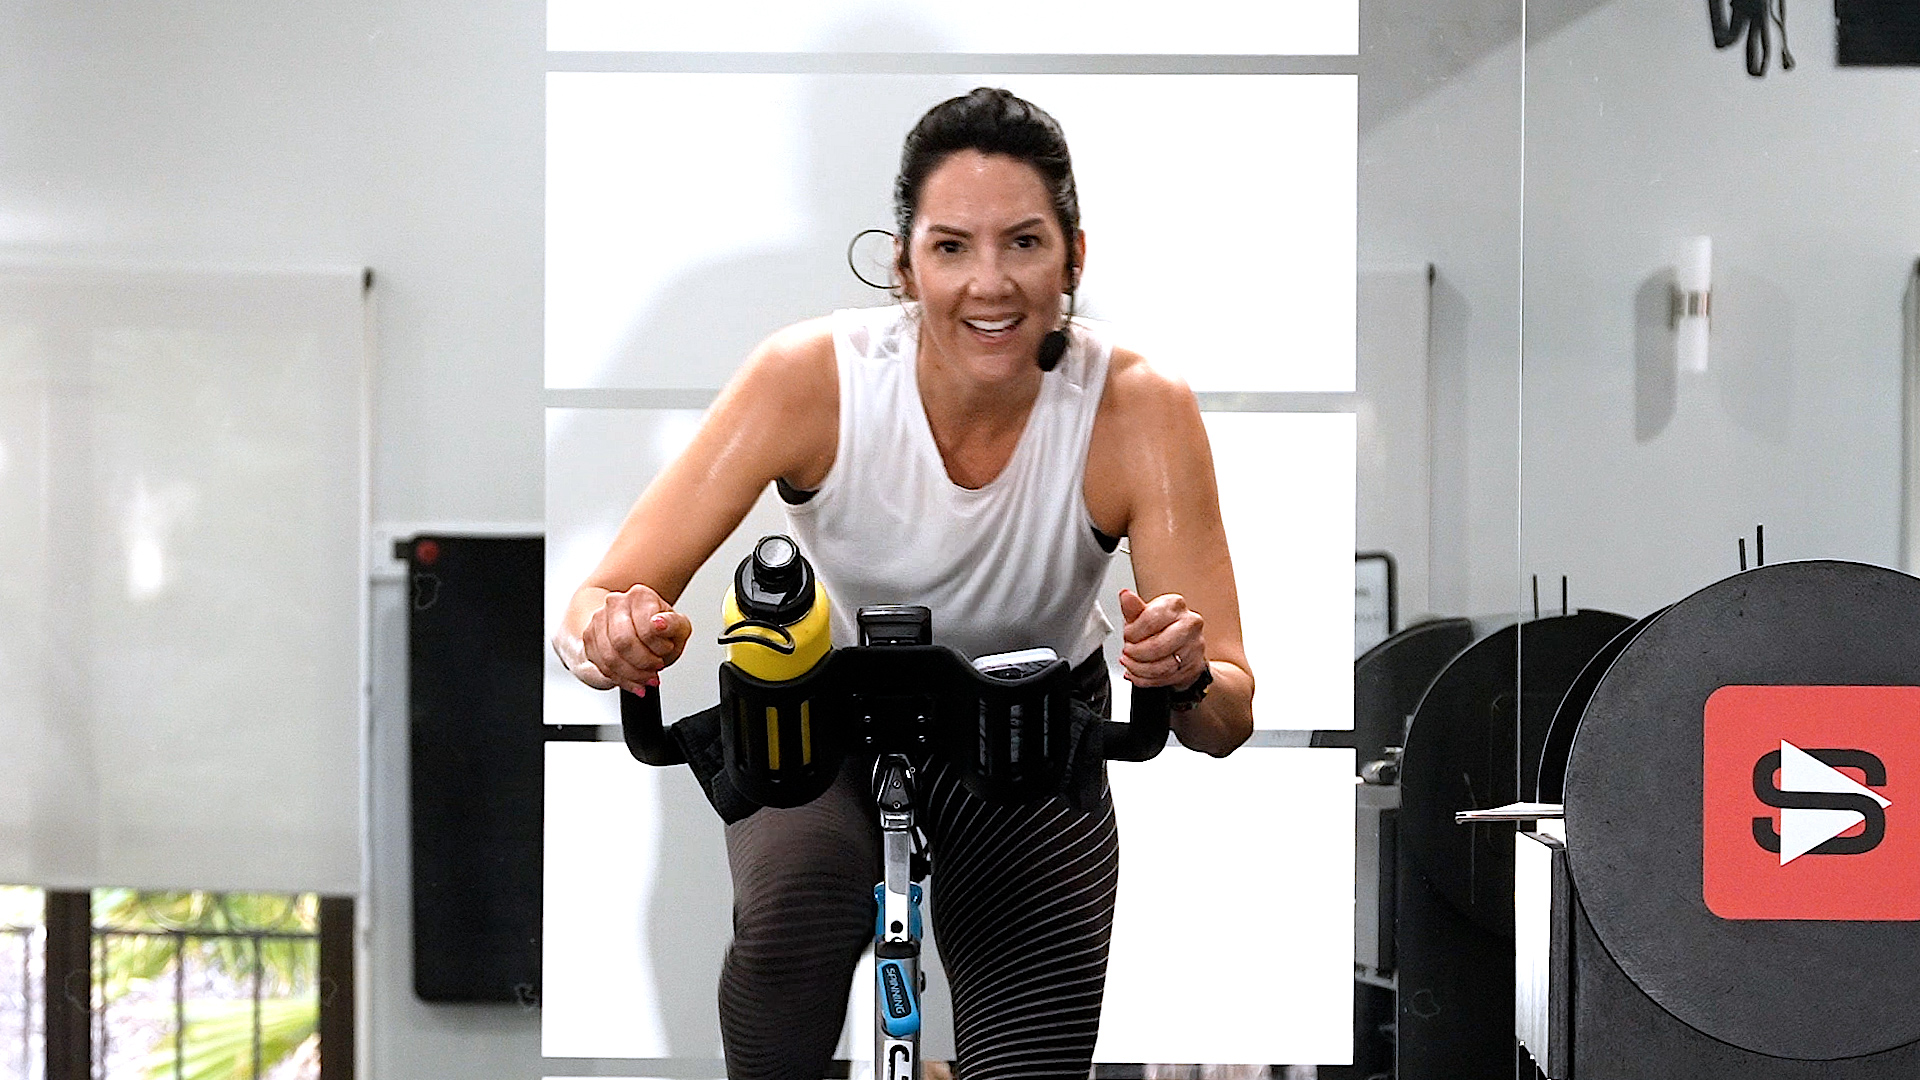 20-minute house party Spin class with Tabata 20 Min House Party Ride